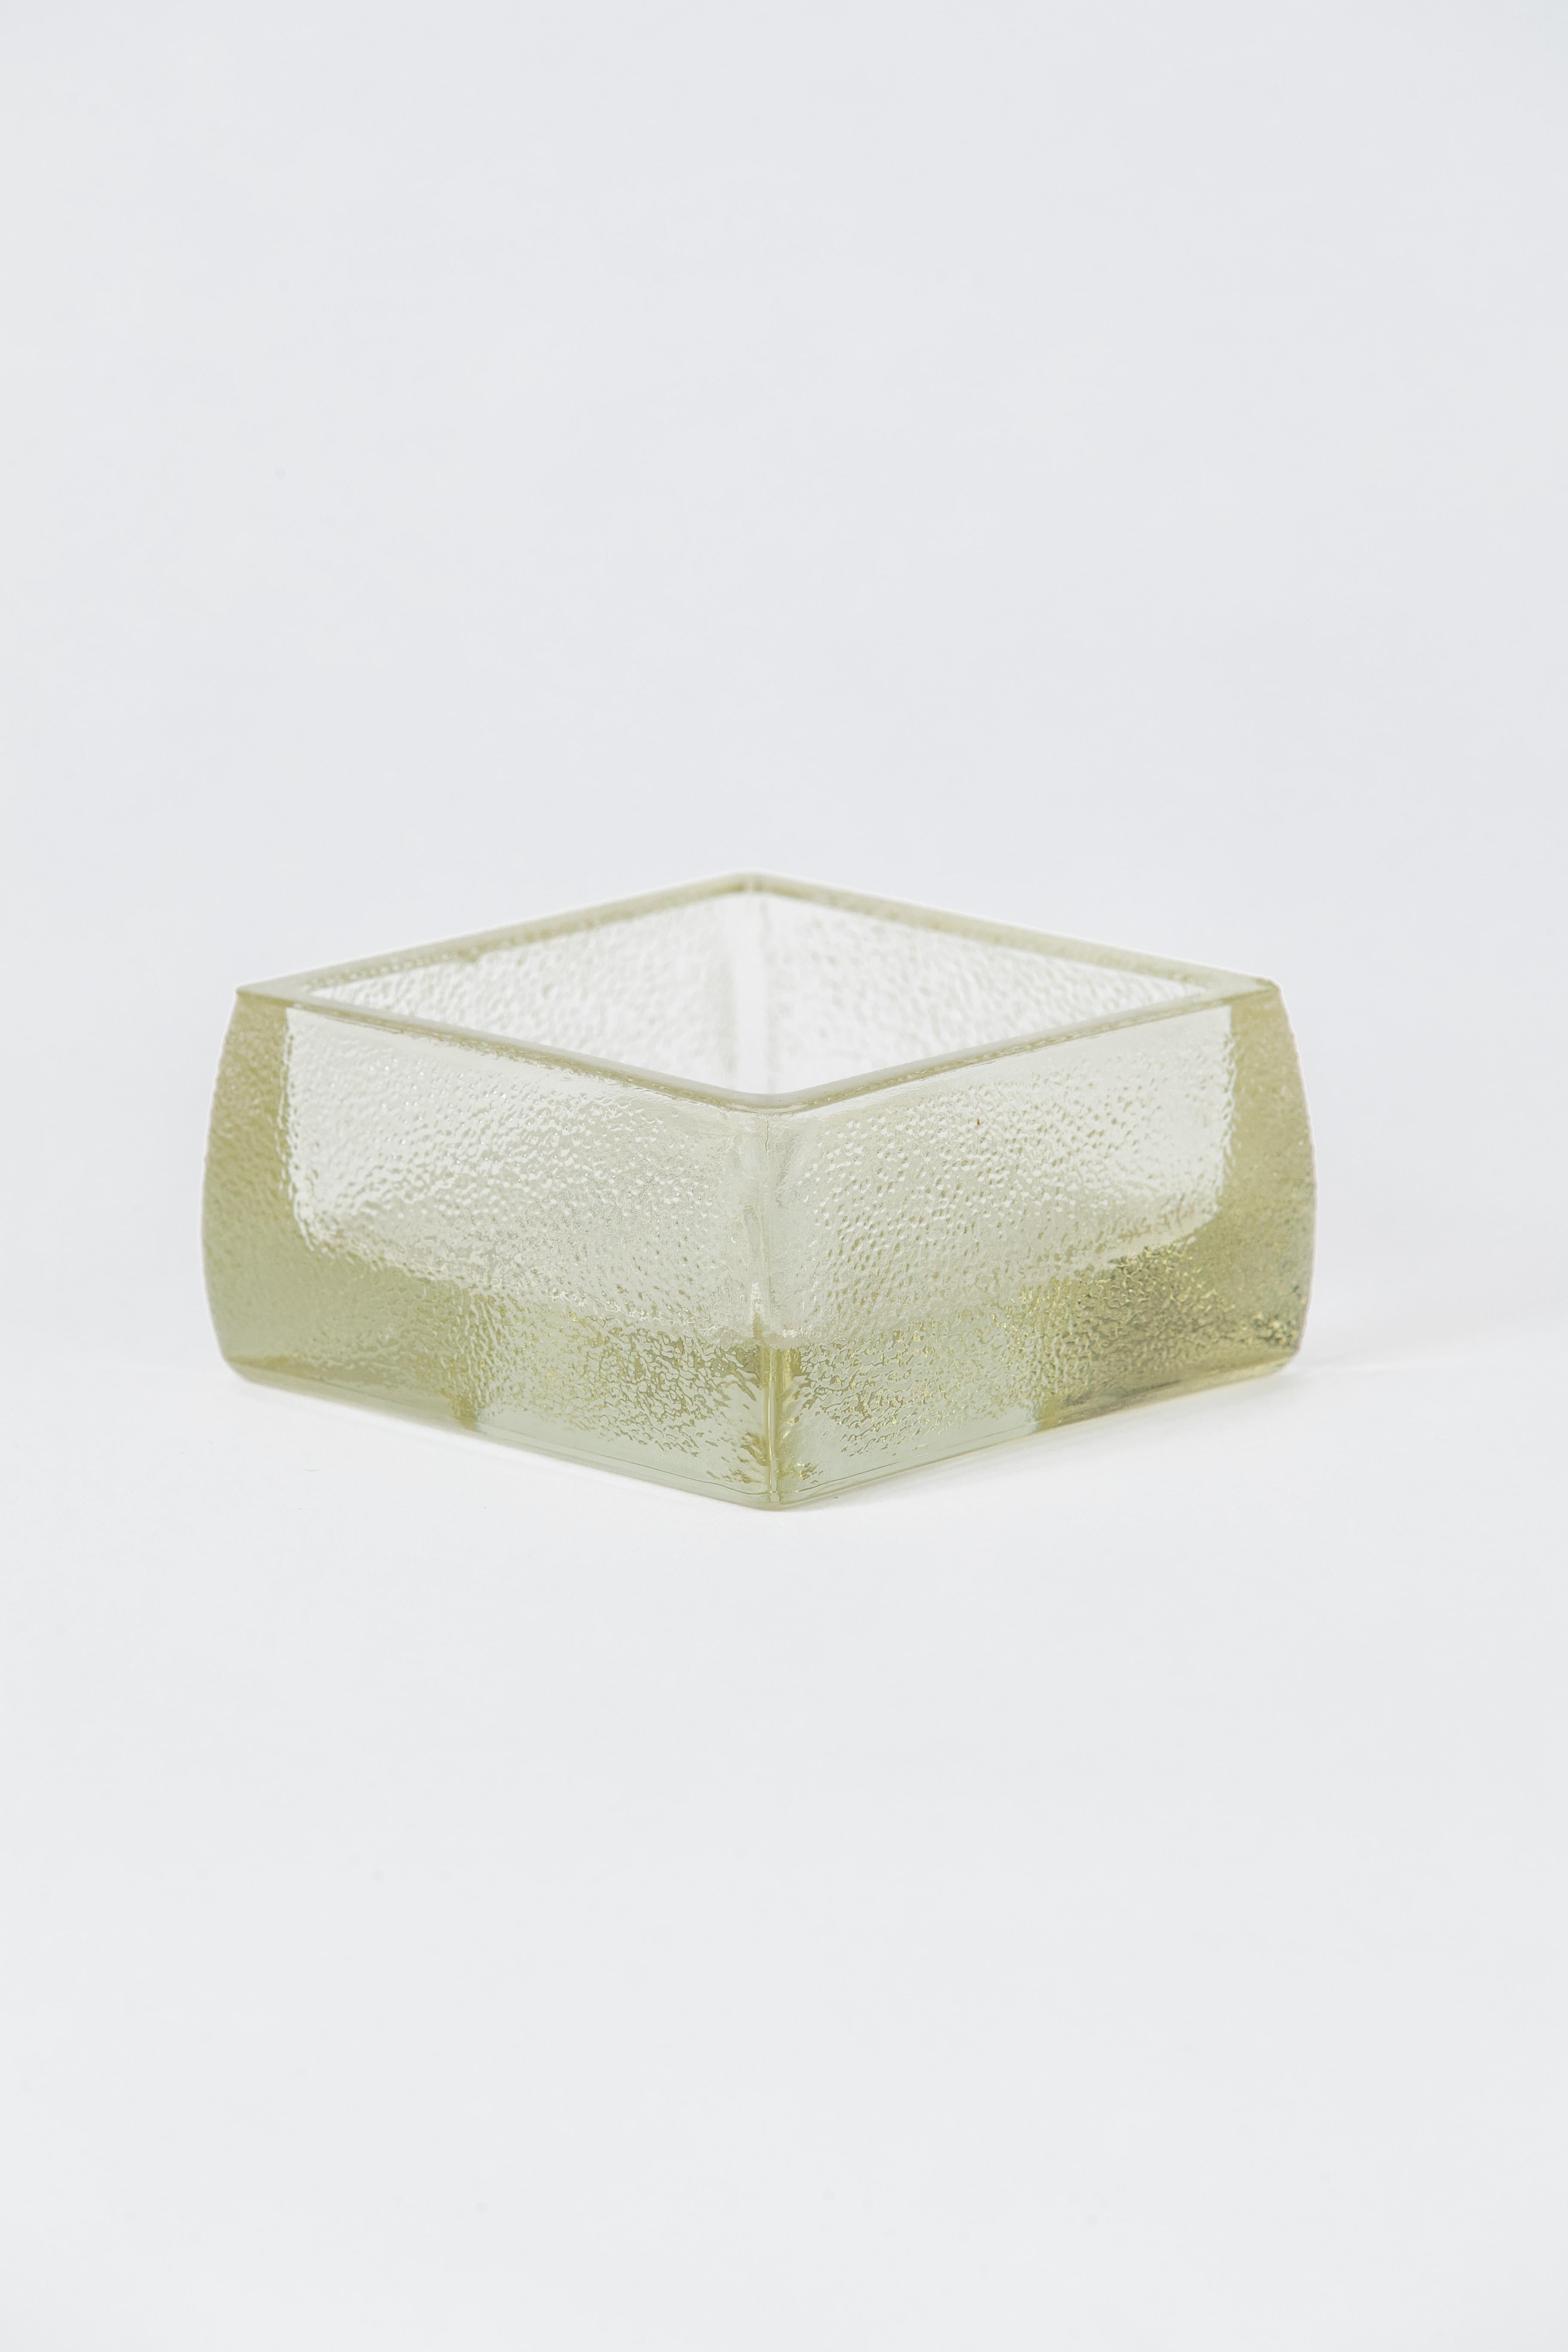 A heavy cast glass by French maker Lumax, supplier glass to everyone from Corbusier to Adnet. You can see their work in examples of architecture from the period as well as in leather-wrapped objects by Adnet.